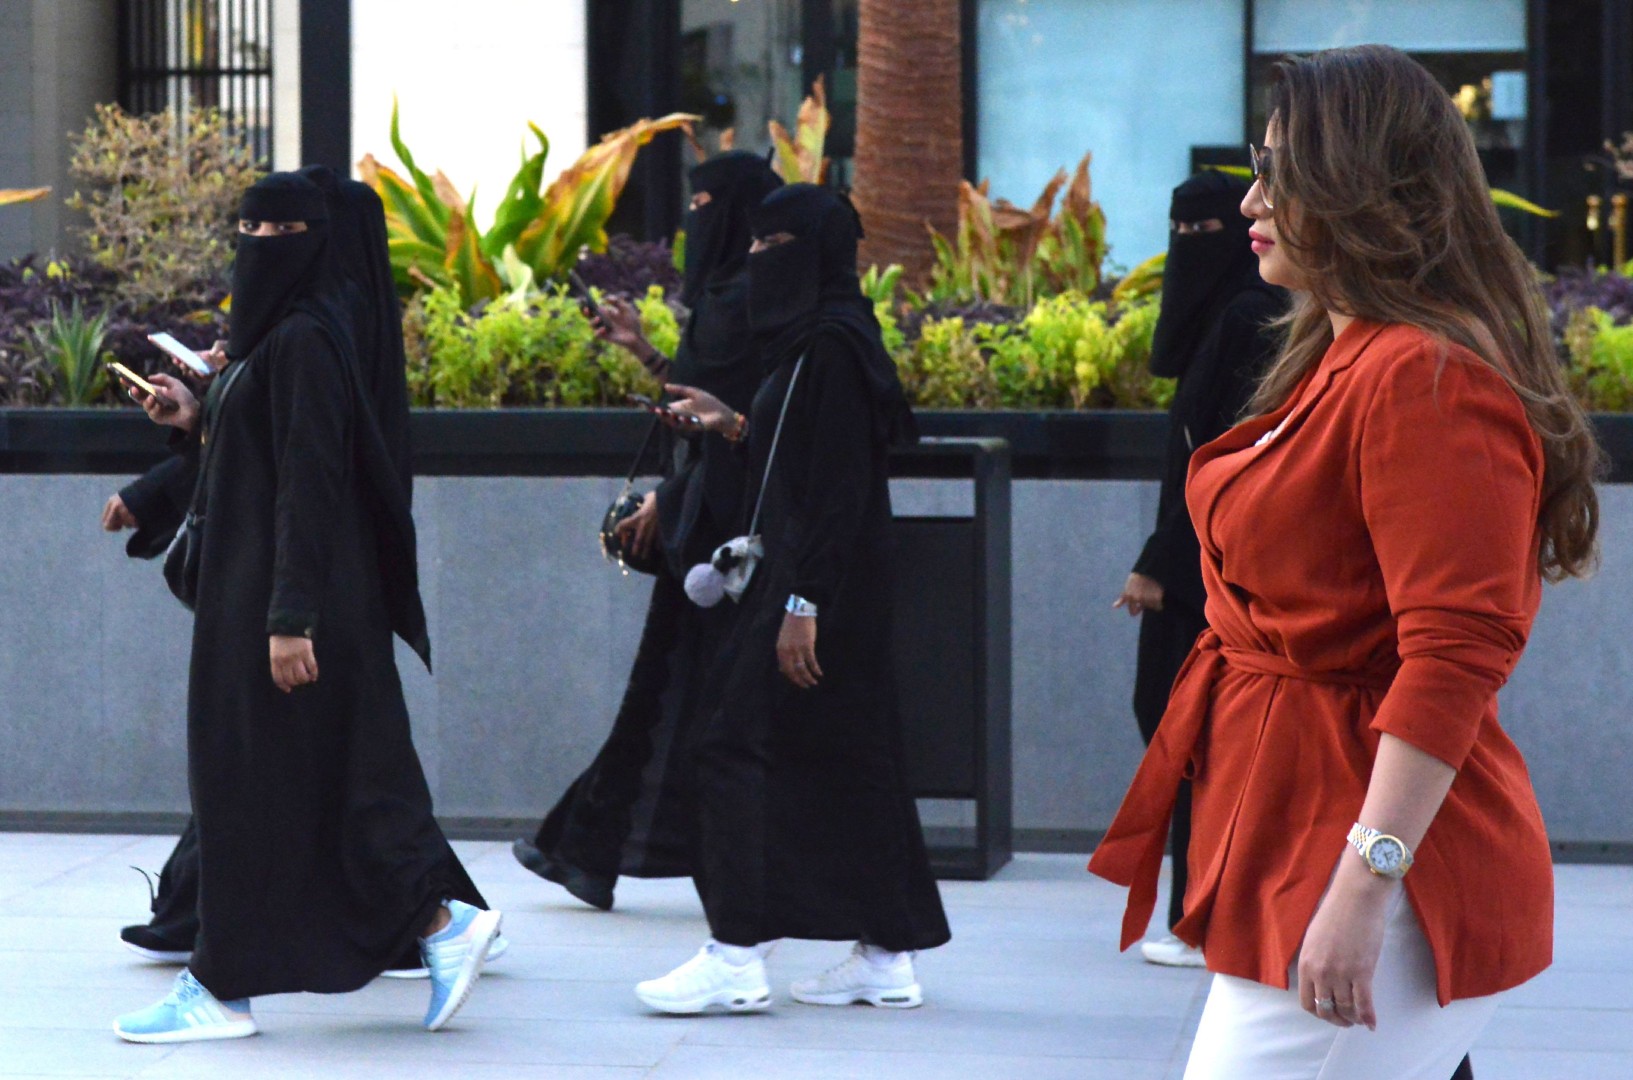 Women's rights in Saudi Arabia: real change or cosmetic reforms? | South China Morning Post